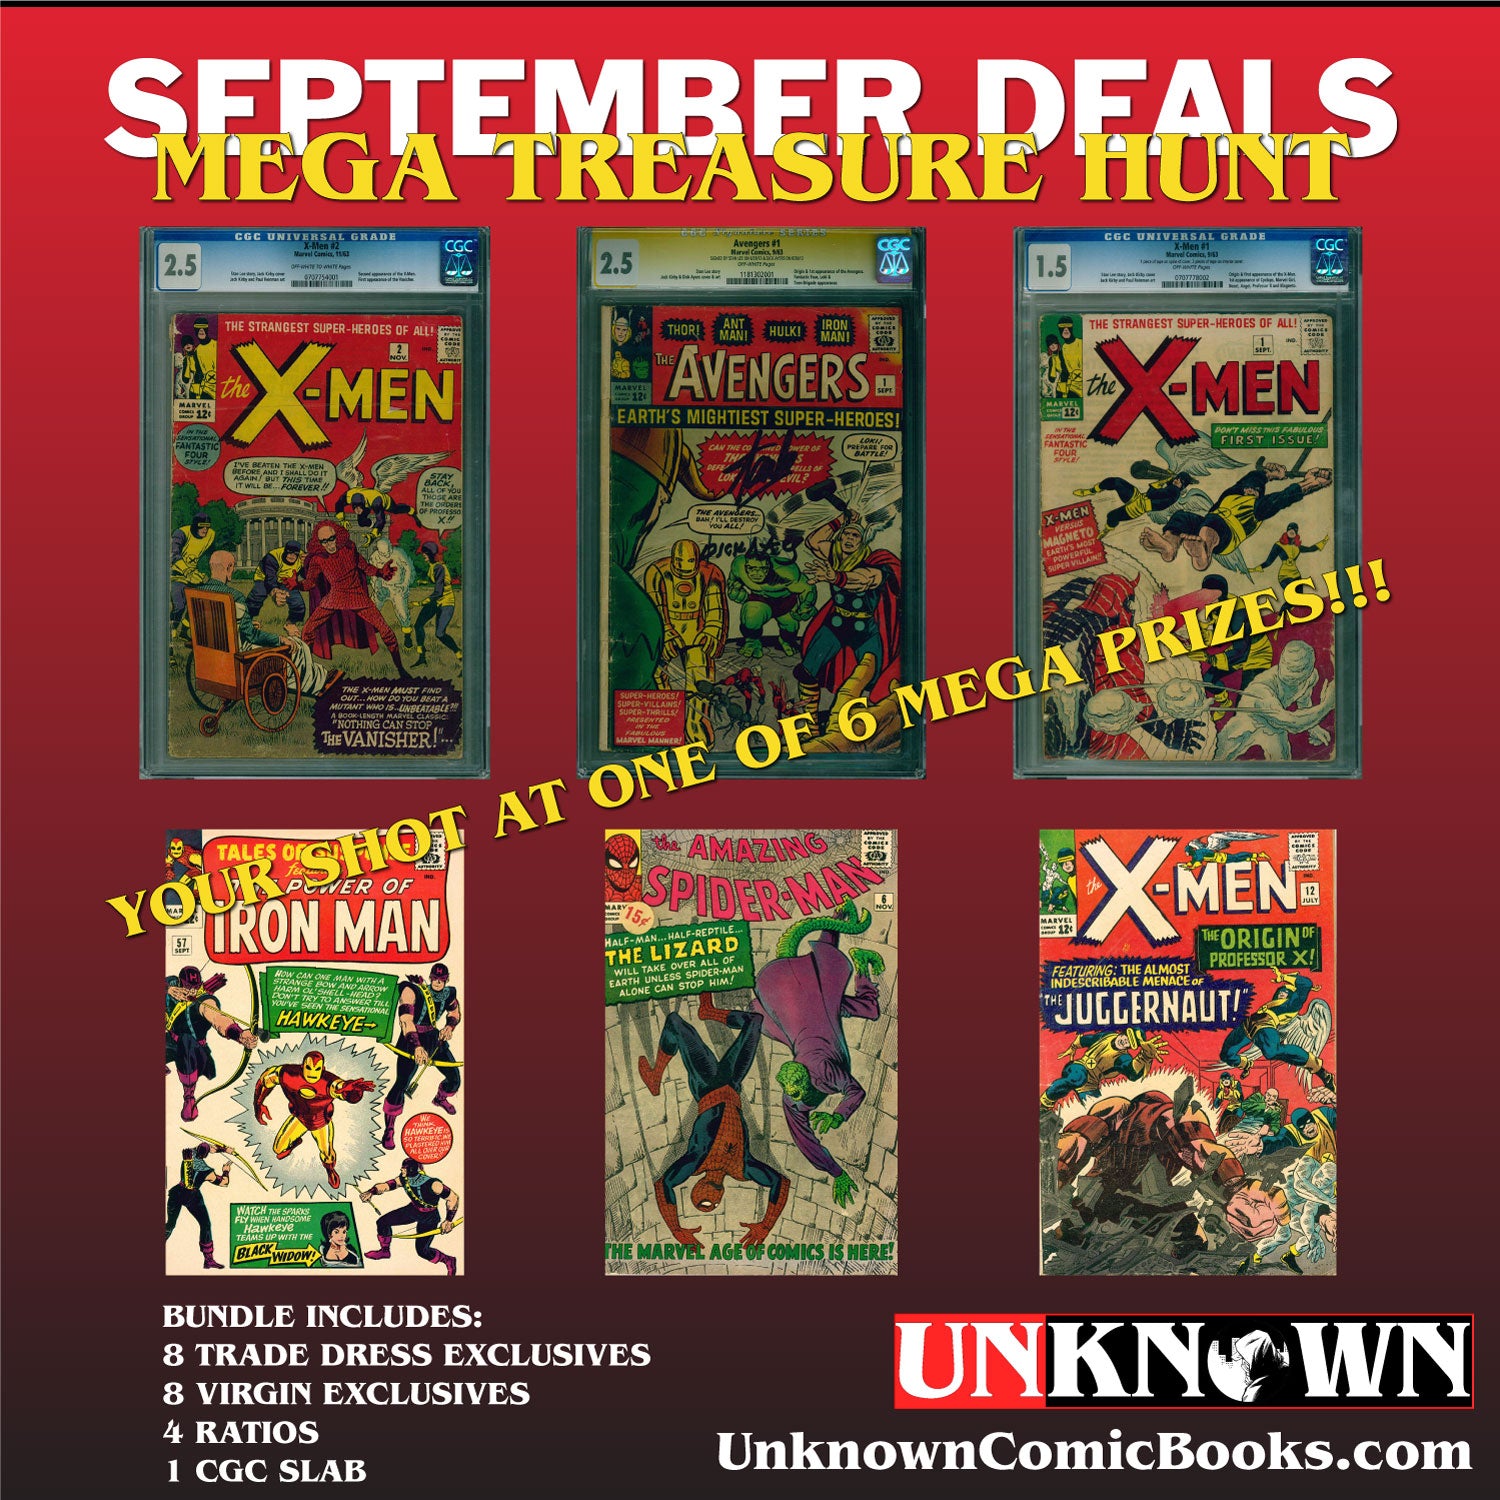  i il mis S EARTH'S MIGHTIEST SUPER-HEROES - R L g BT Pqusx' G Ll "zilEEERNAUT."f, : % f Lk BUNDLE INCLUDES: 8 TRADE DRESS EXCLUSIVES 8 VIRGIN EXCLUSIVES 4 RATIOS - S UnknownComicBooks.com 